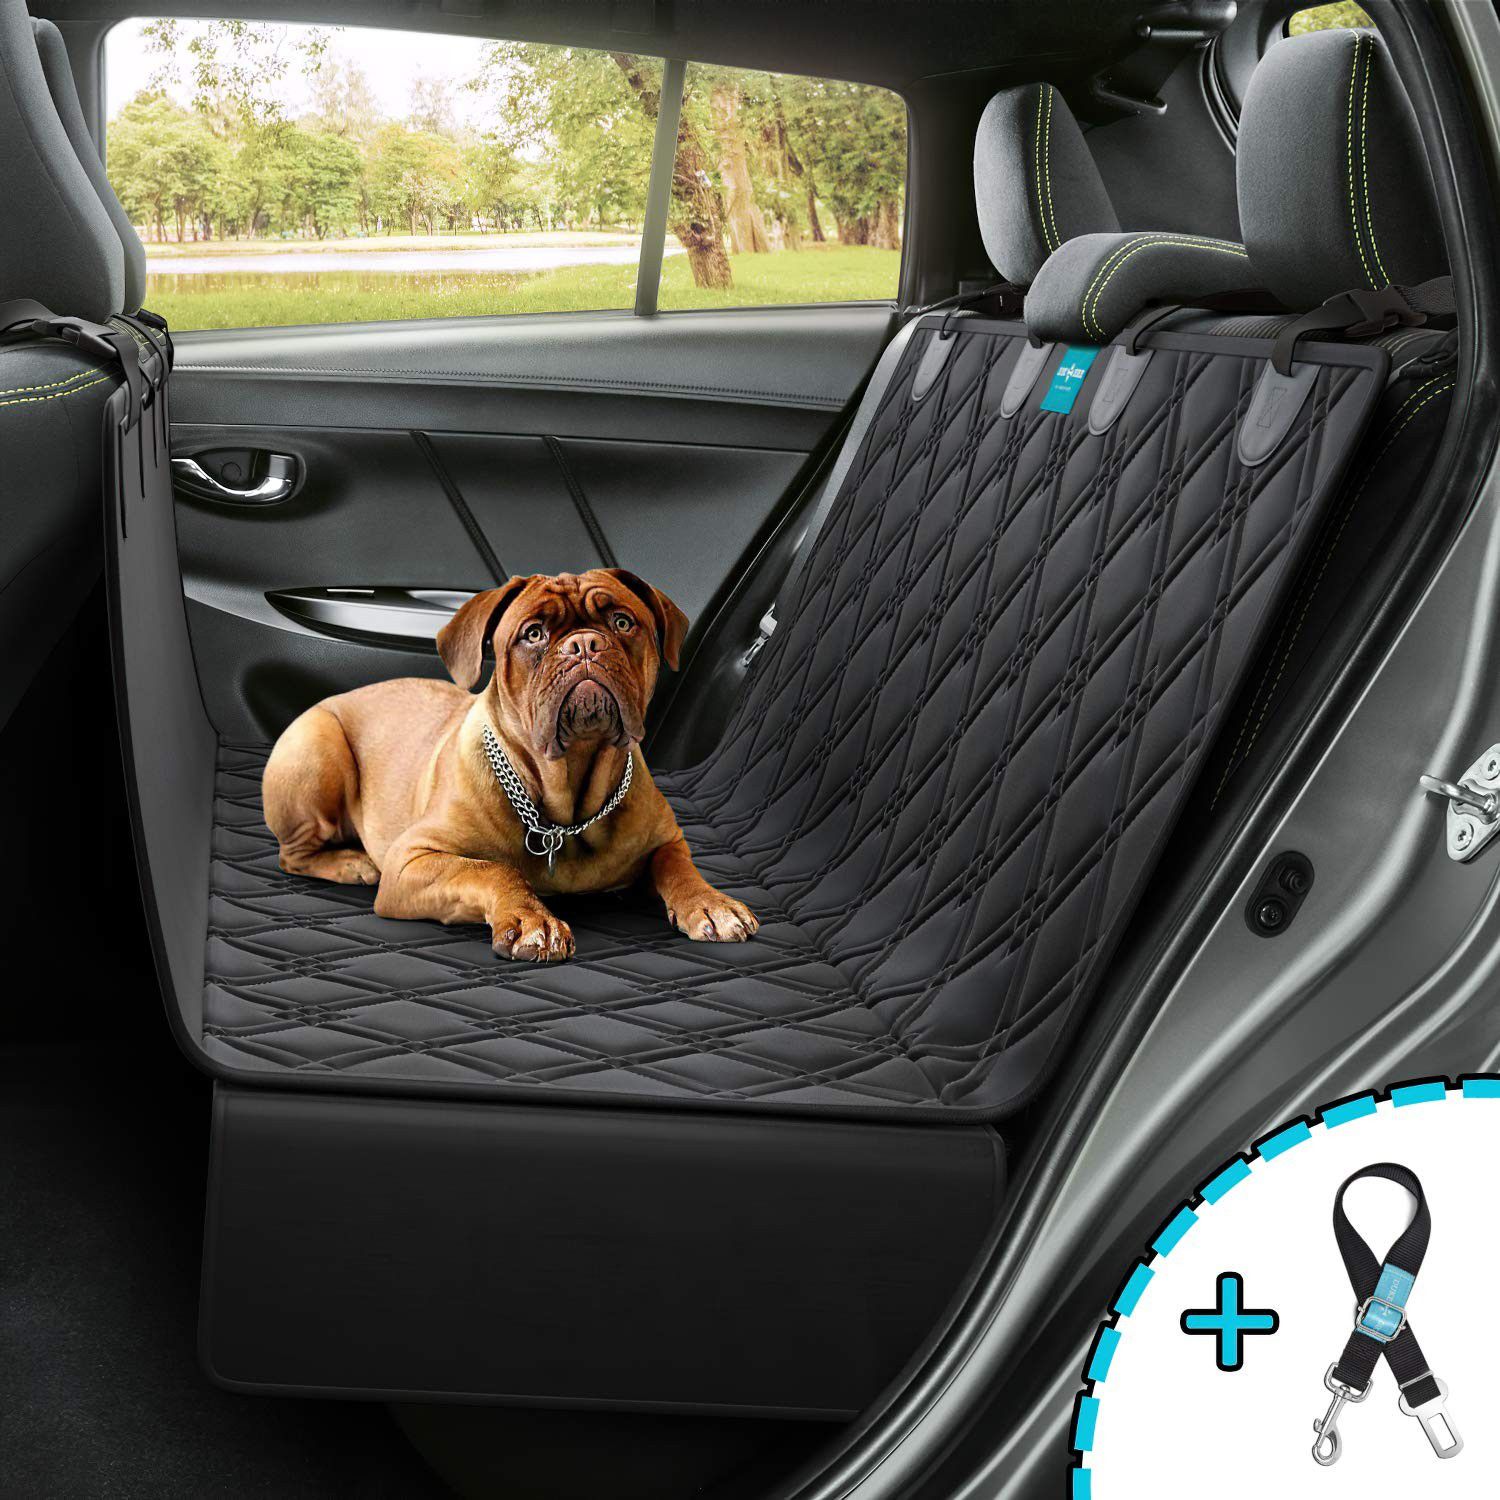 Brand New !! Dog car seat cover heavy duty waterproof material washable luxury stylish seat belt leash INCLUDED